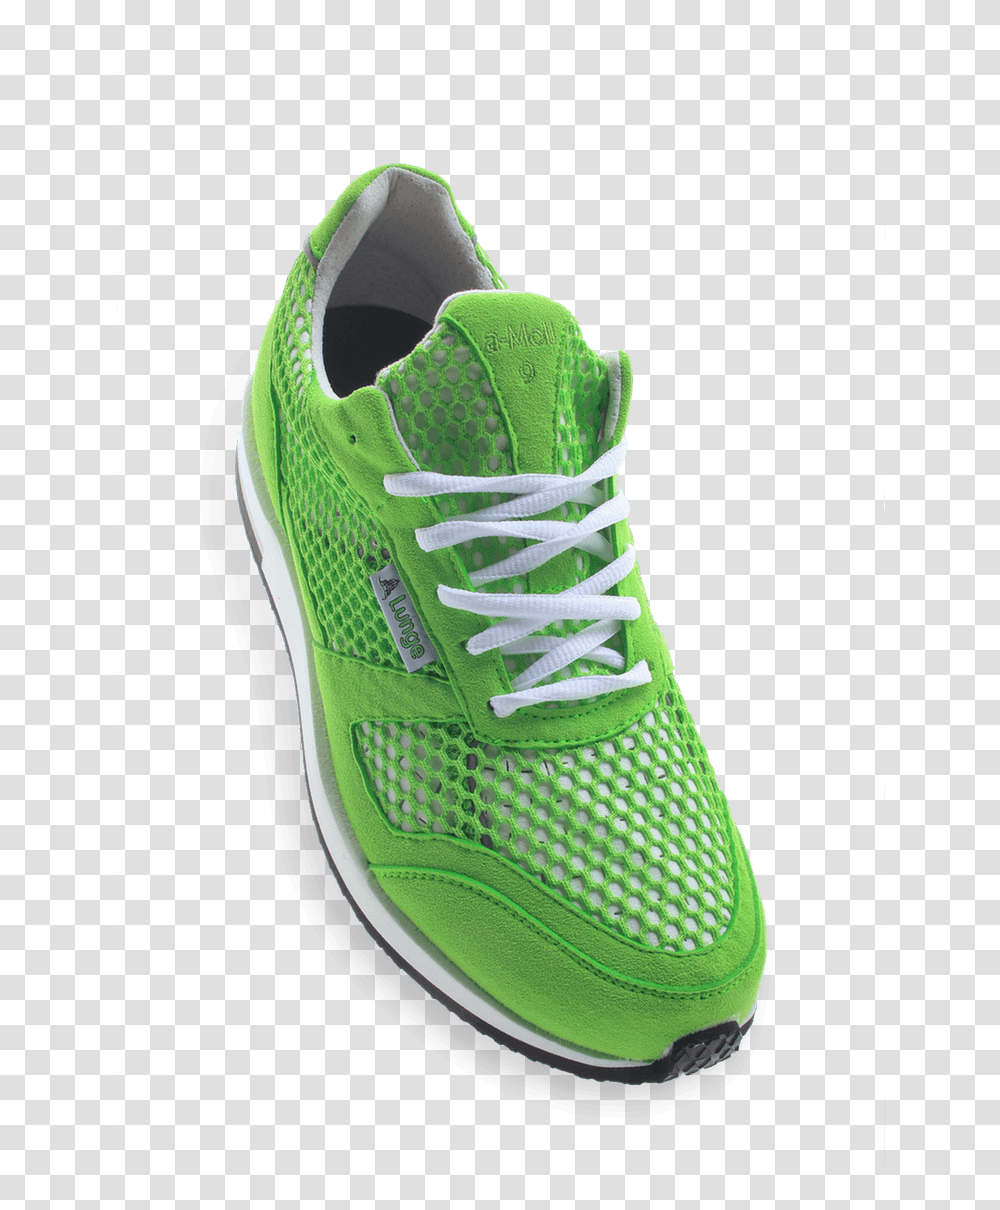 Classic Run In Grn Grn Green Shoes, Apparel, Footwear, Running Shoe Transparent Png